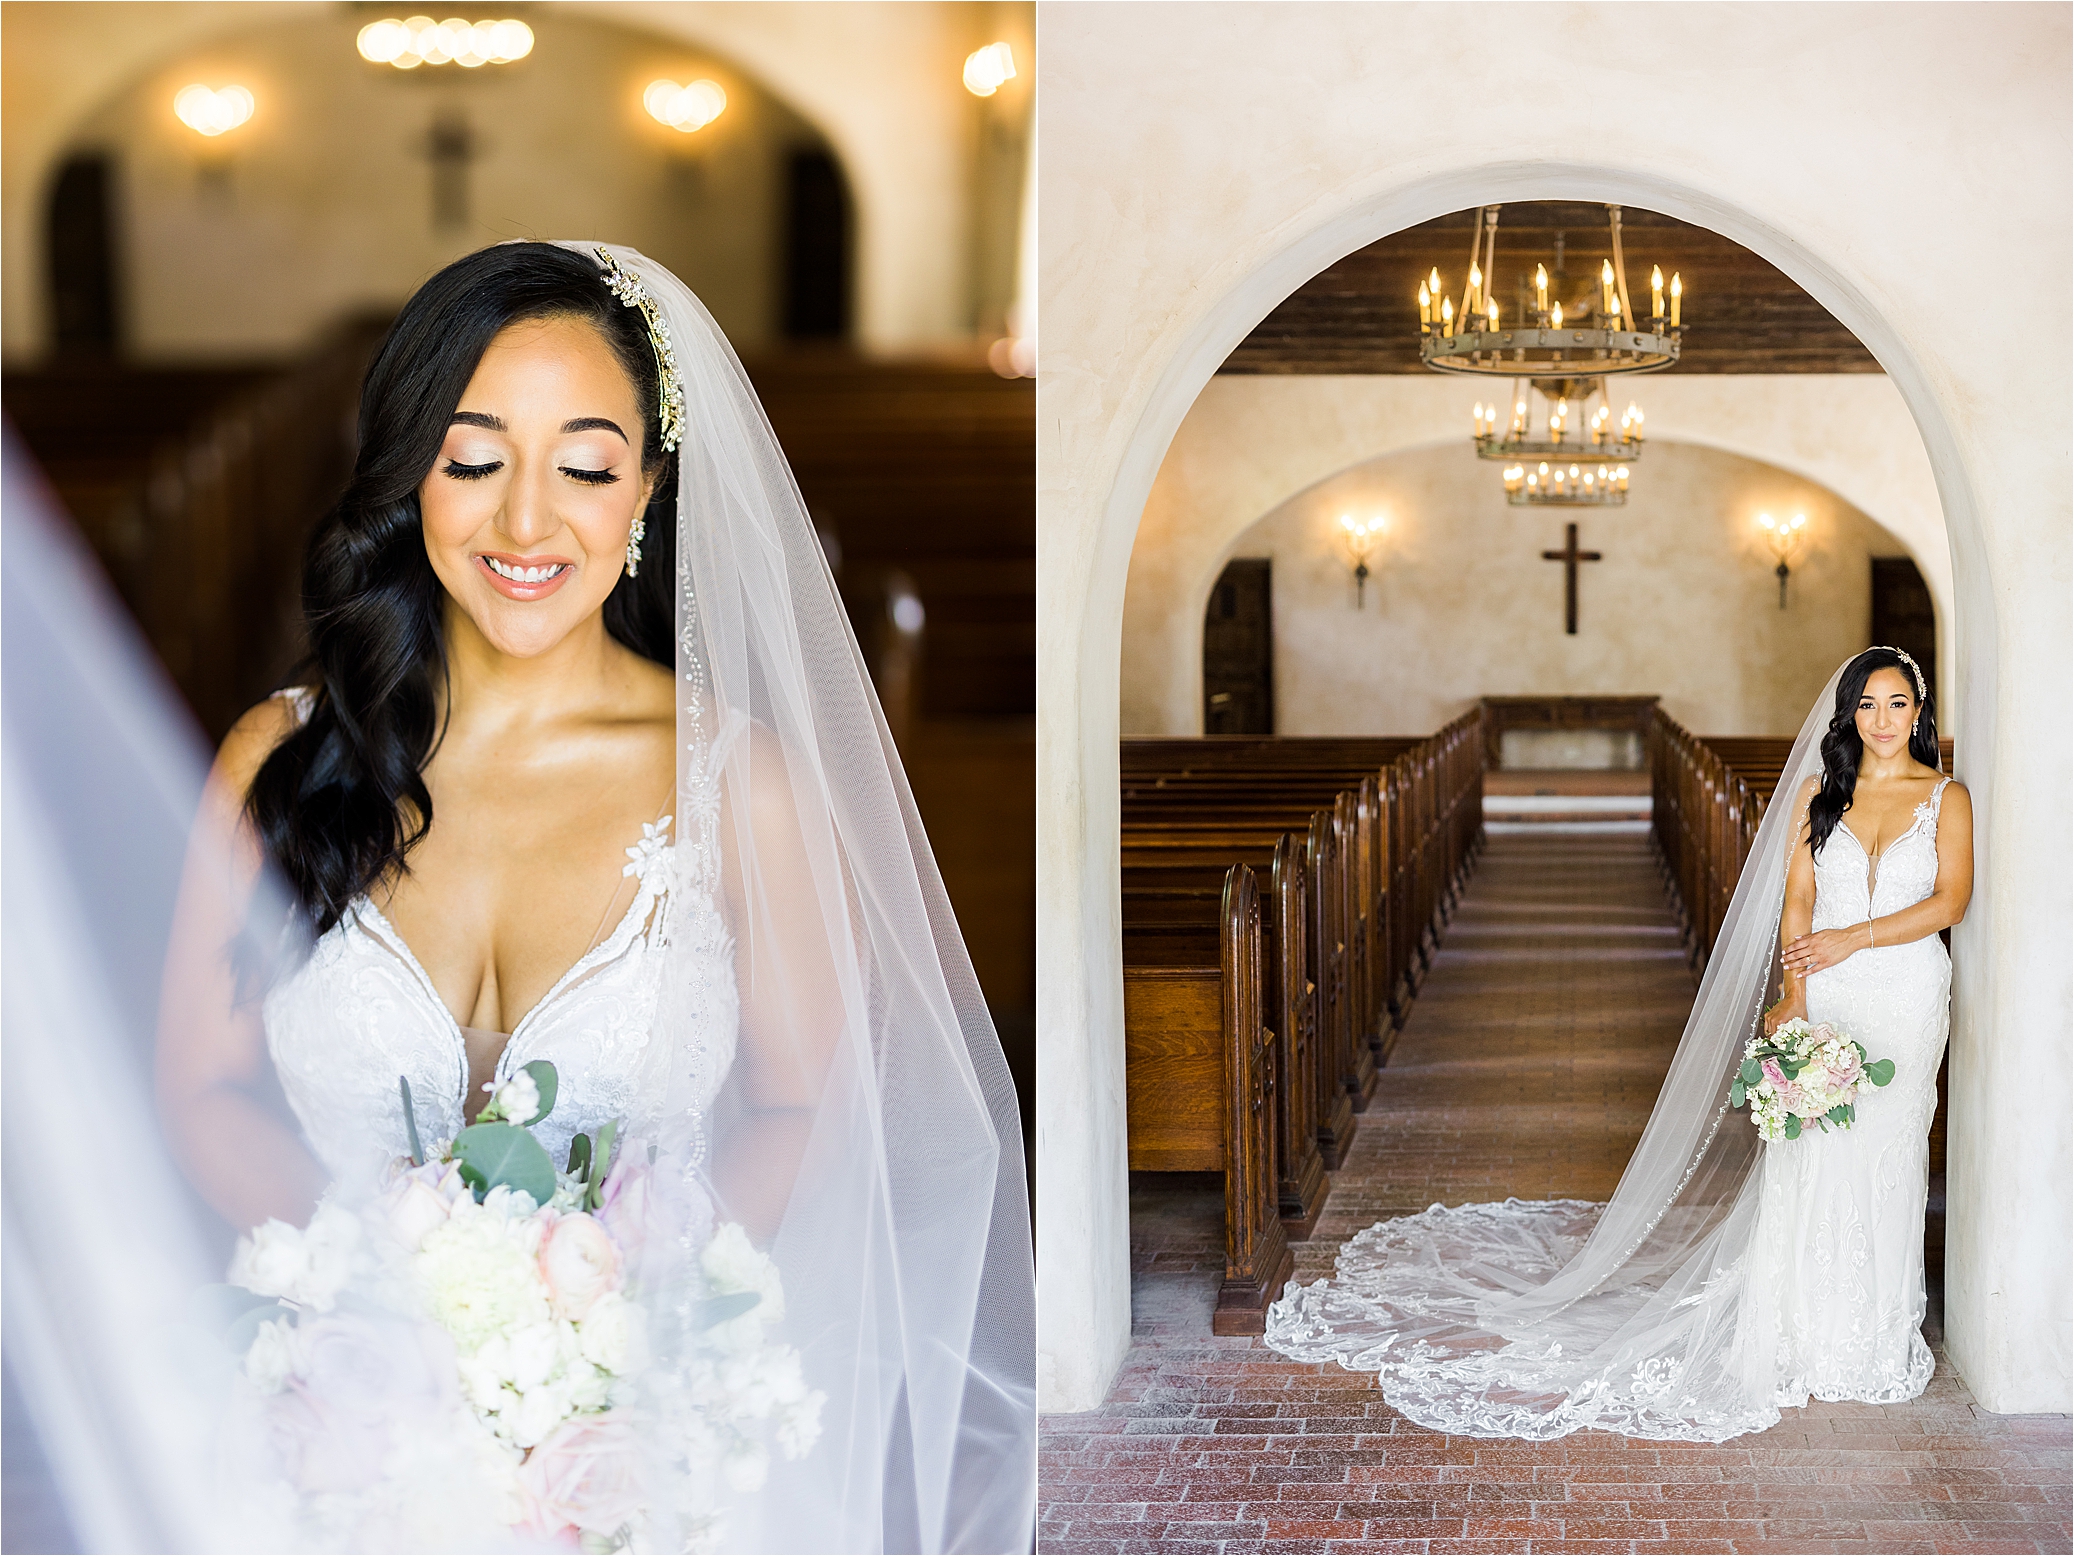 A bride smiles and looks down as her long veil swoops in front of her face during her bridal portraits at Mission style wedding chapel in Bulverde, Texas